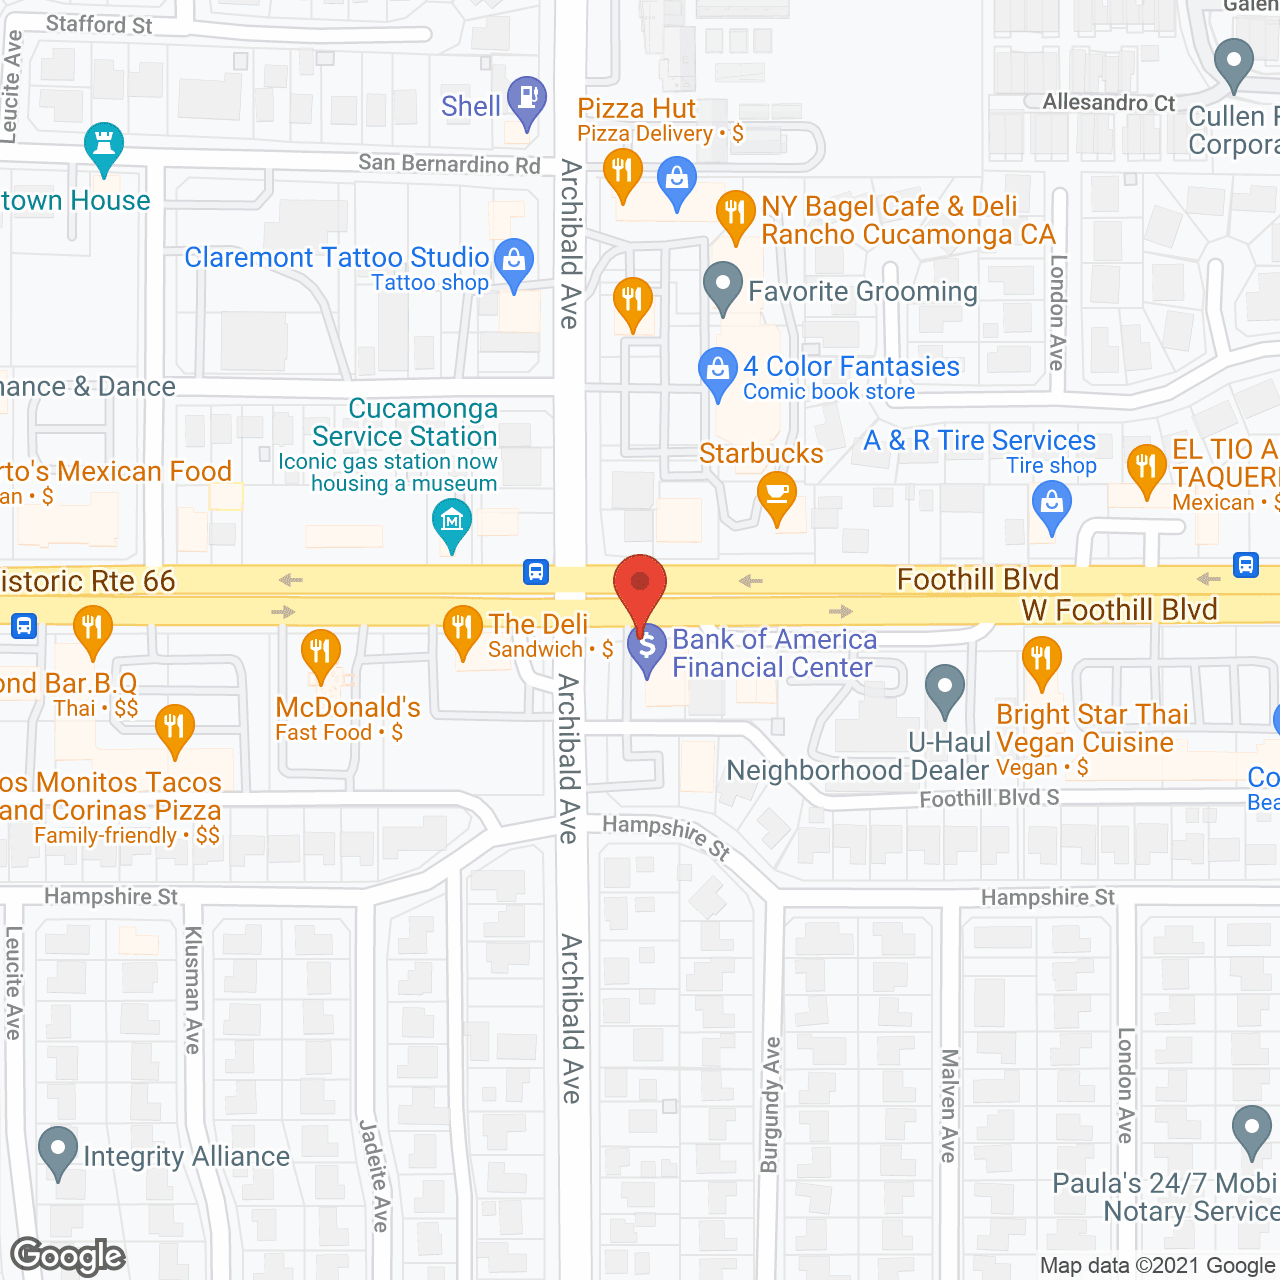 AccentCare of Rancho Cucamonga, CA in google map